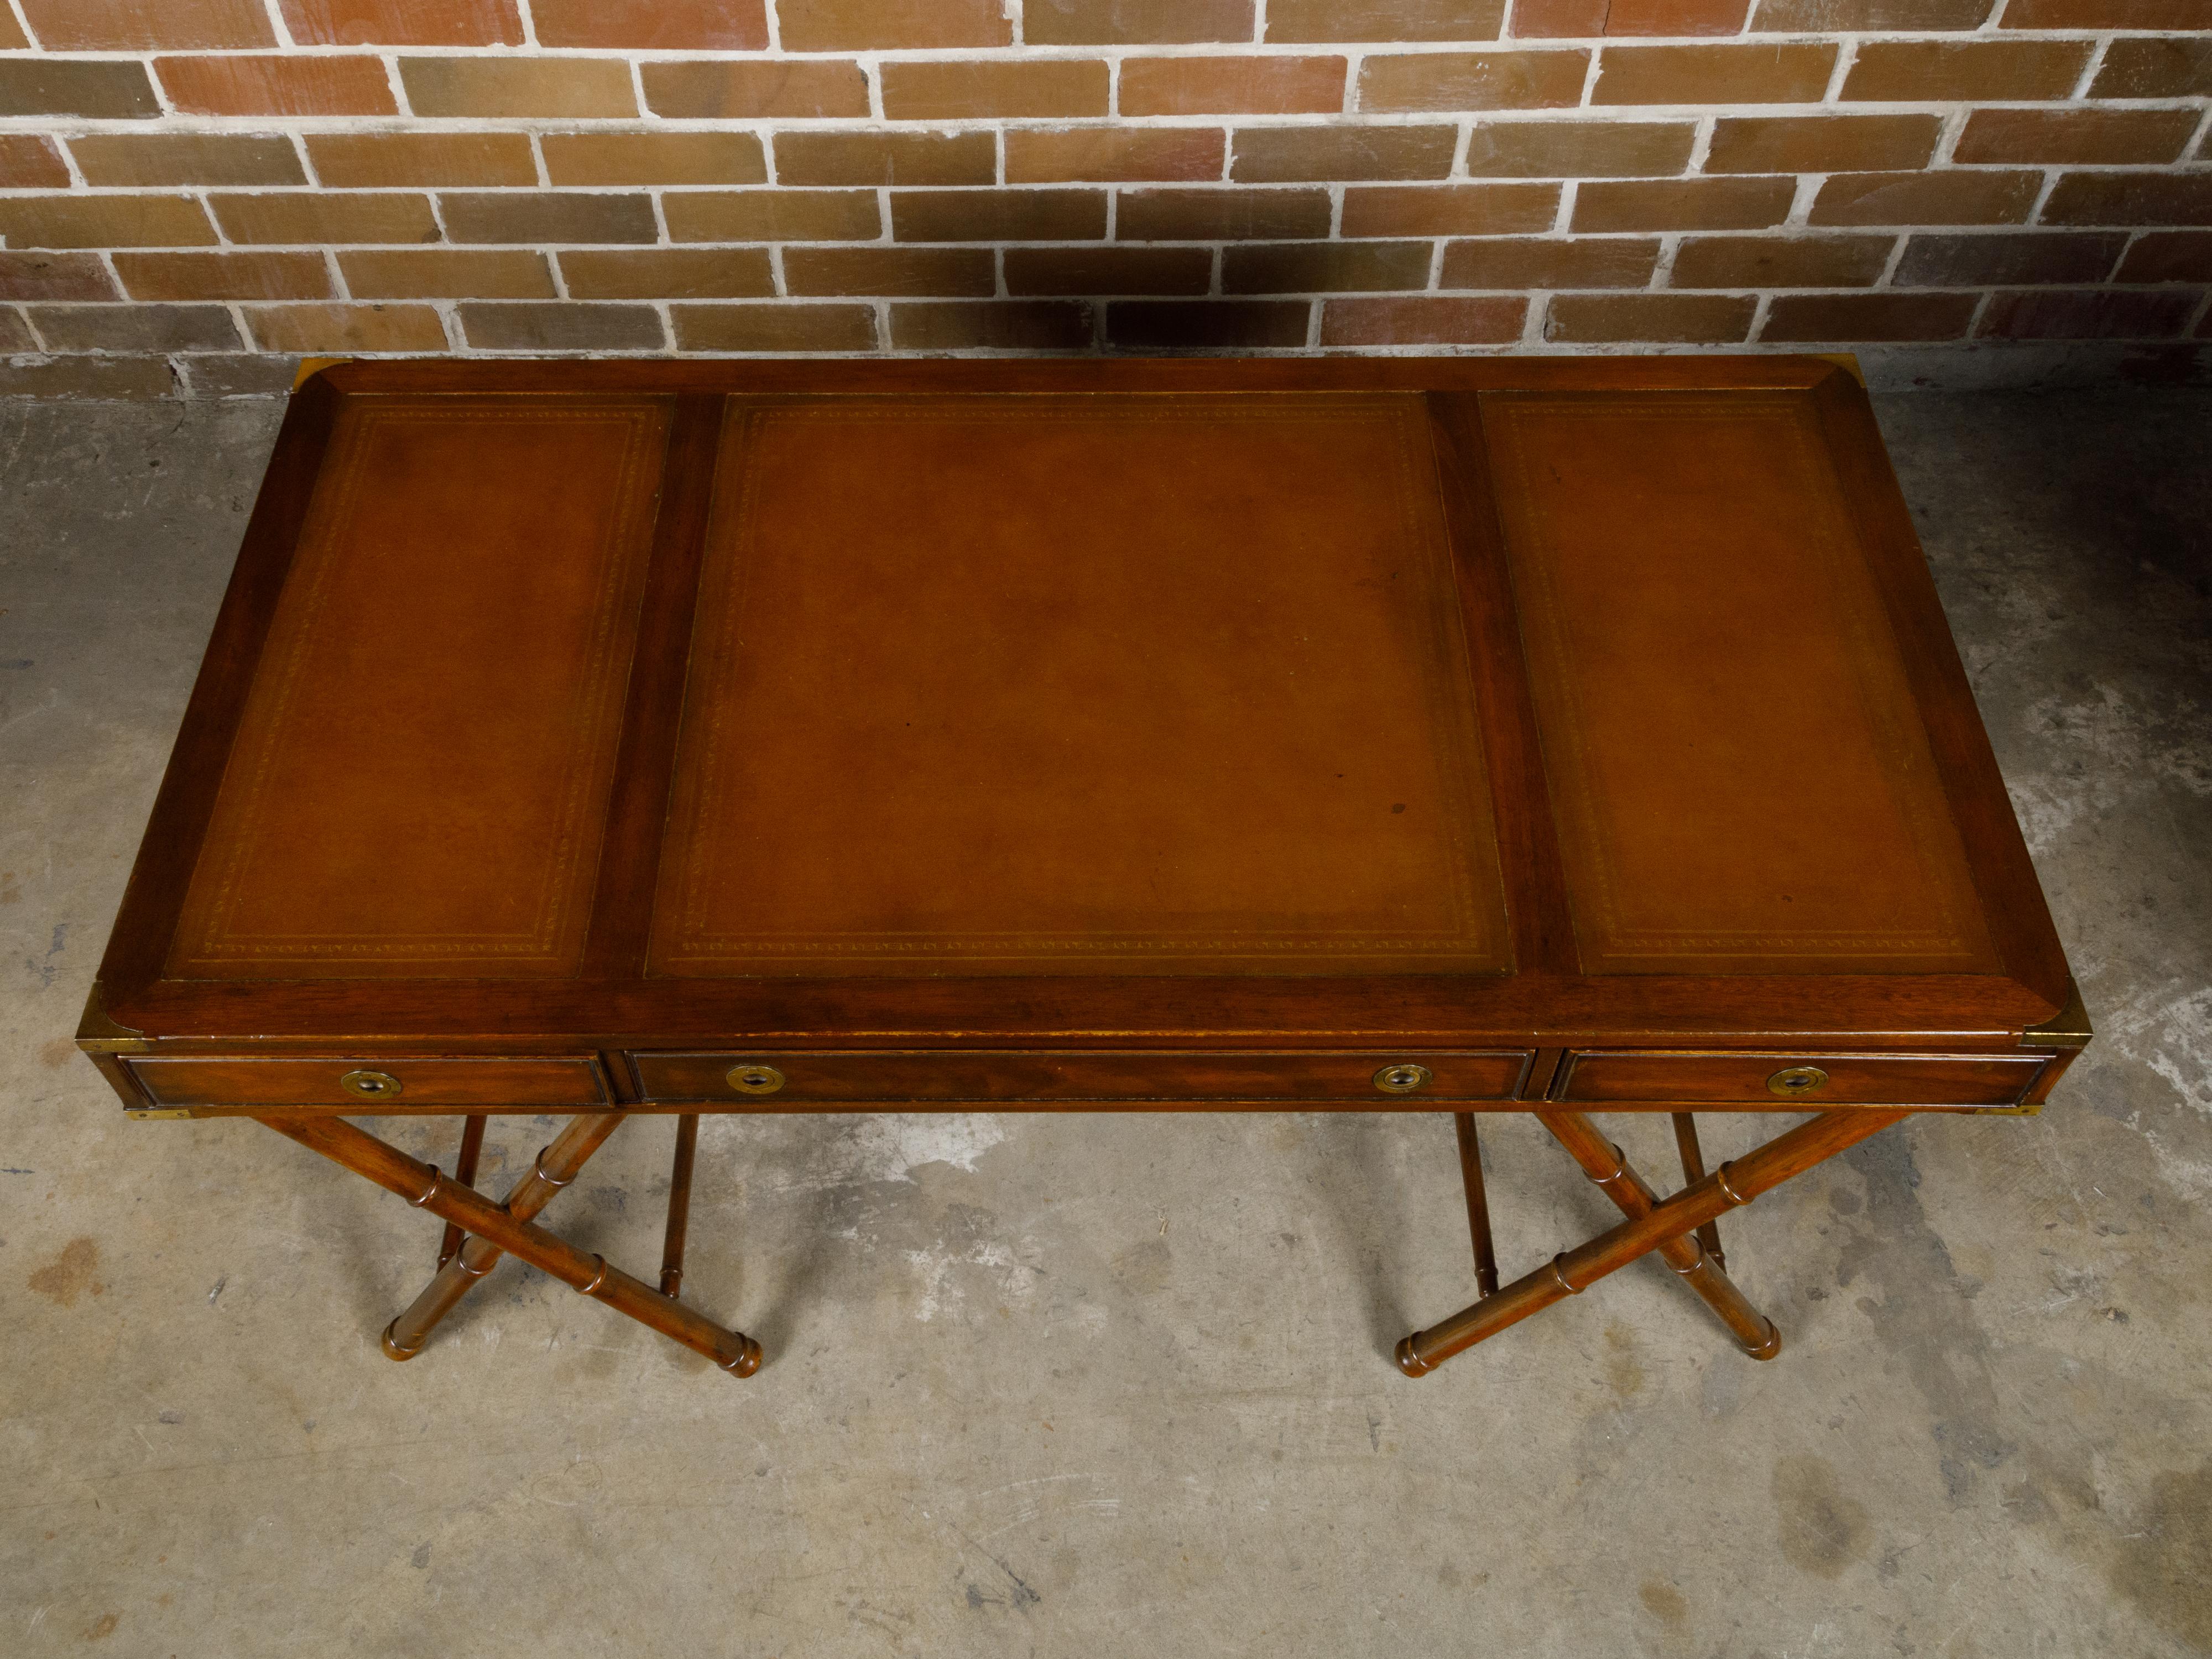 English Campaign Midcentury Desk with Faux Bamboo Base and Leather Top For Sale 6